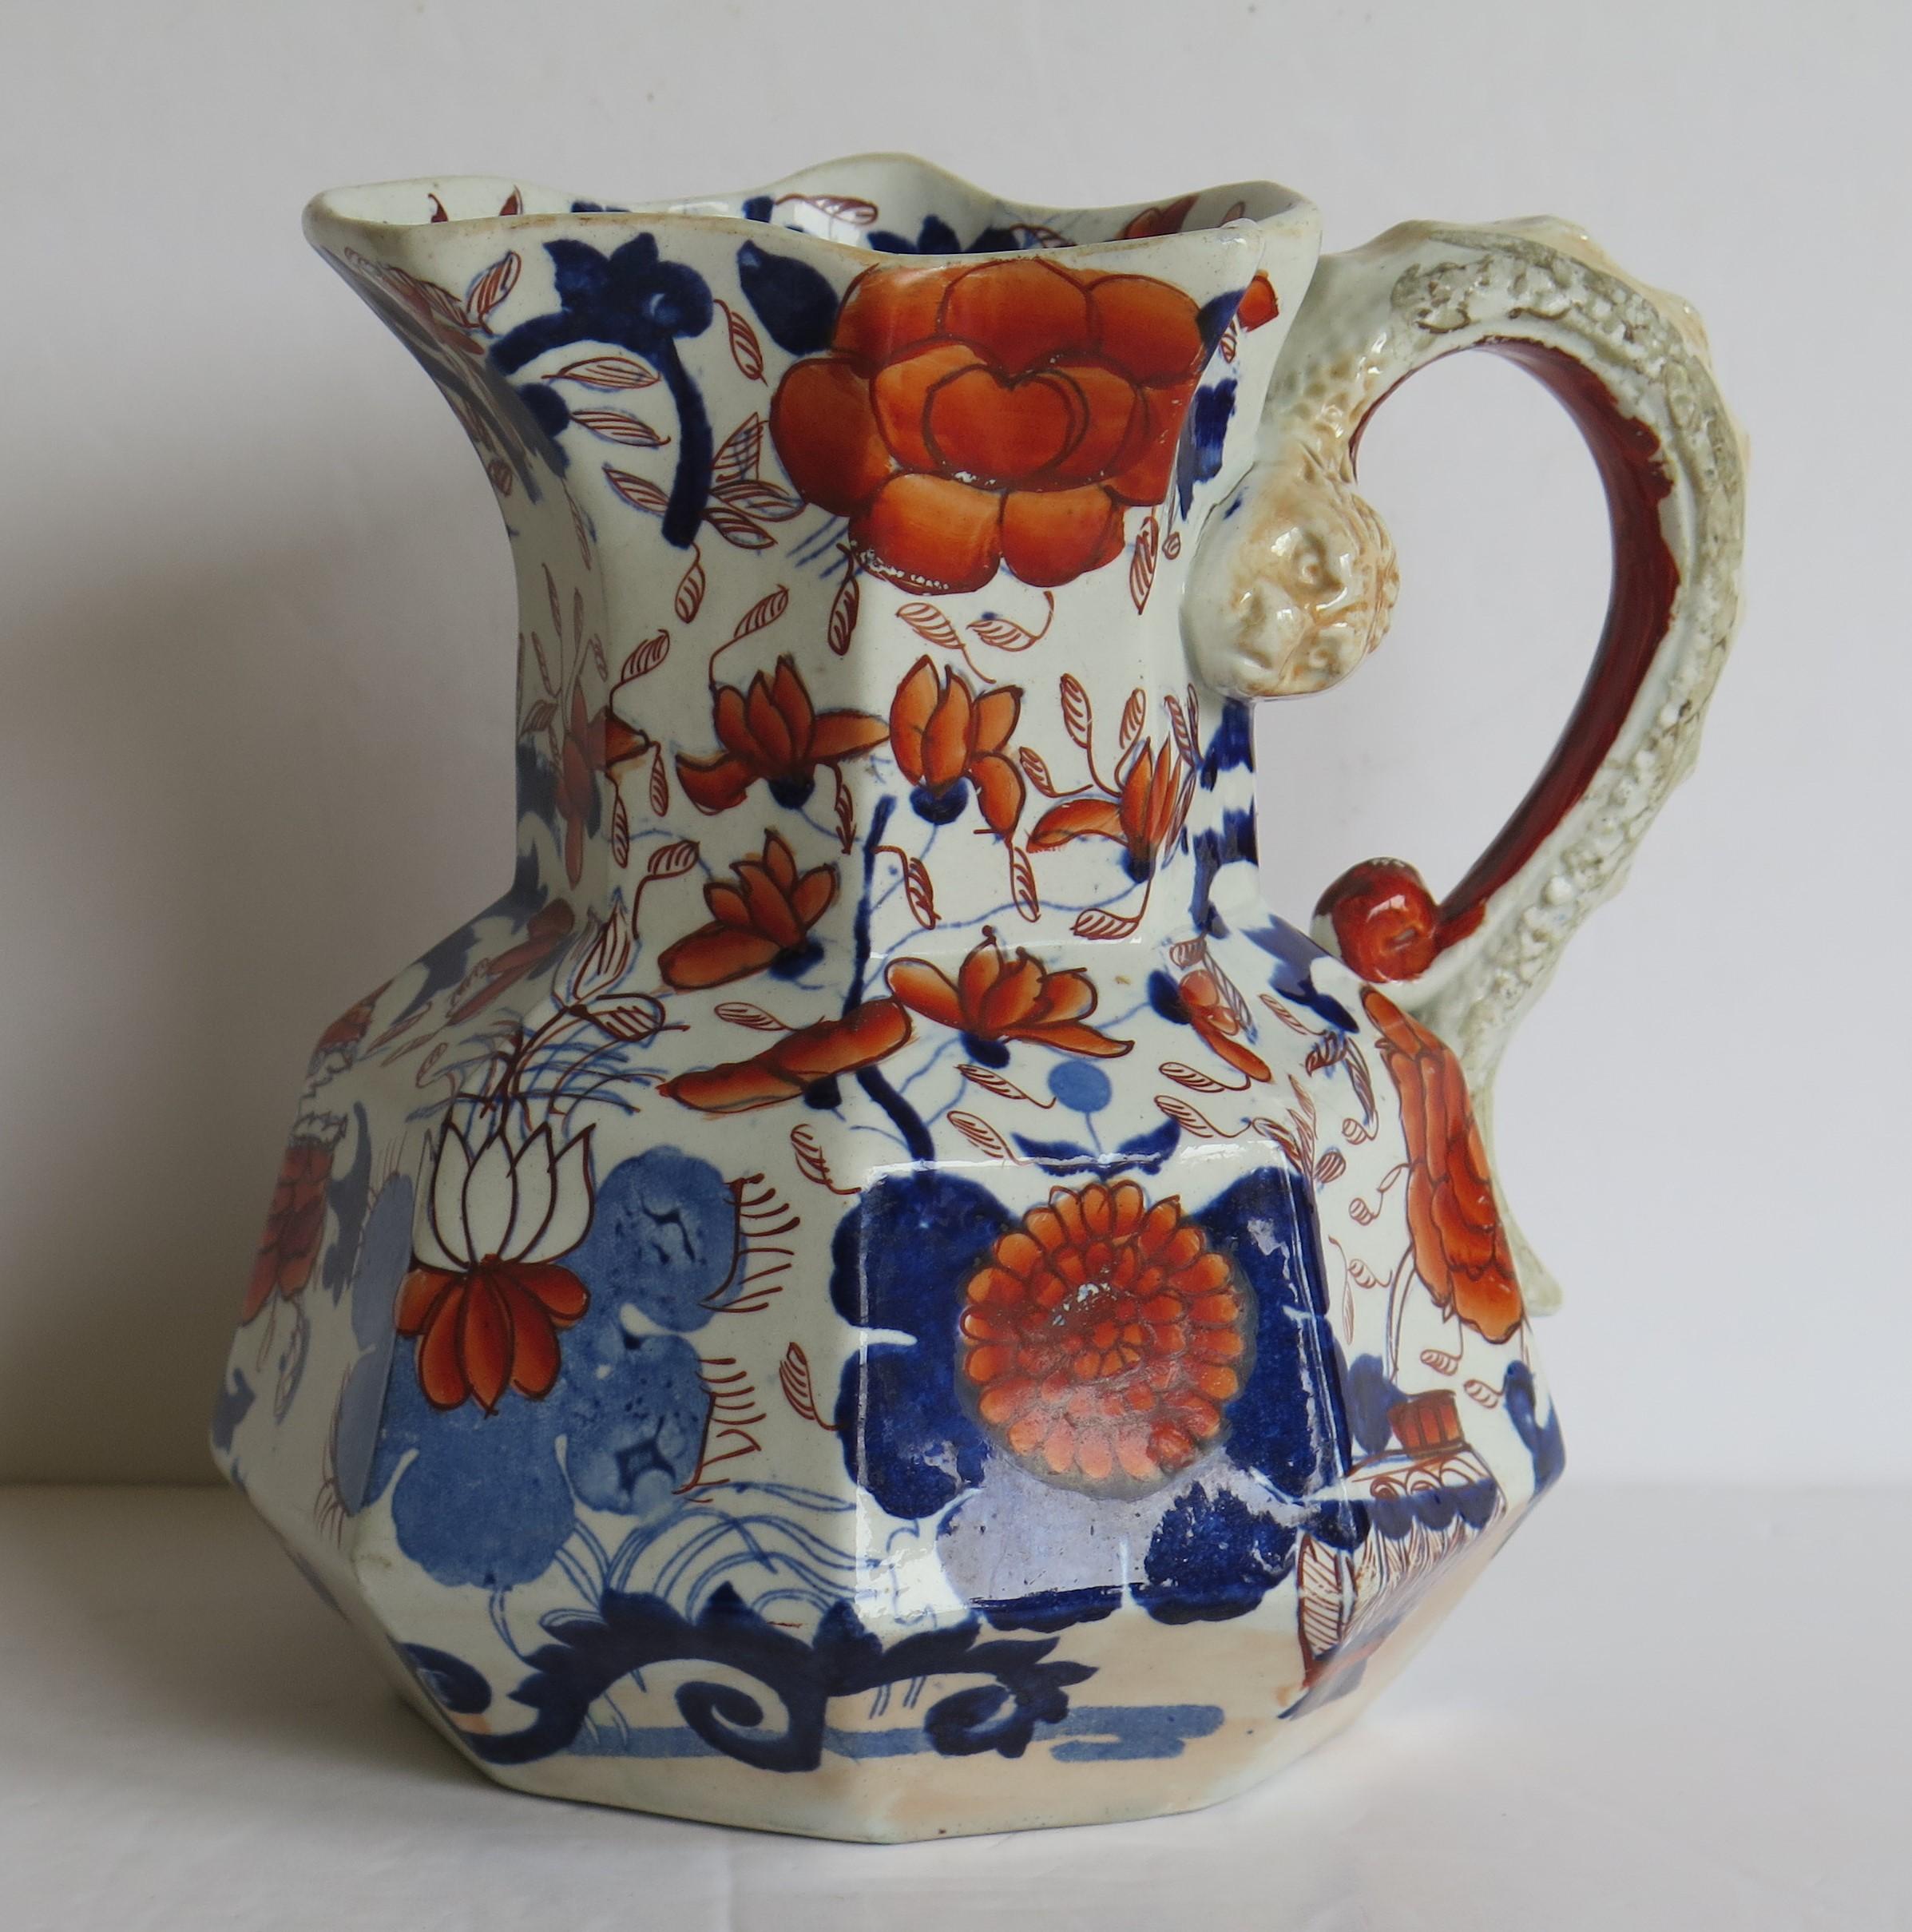 This is a good, early Mason's Ironstone large Hydra jug or pitcher in the Basket Japan pattern, made in the English, late Georgian period, circa 1815-1820.

The jug has the octagonal 